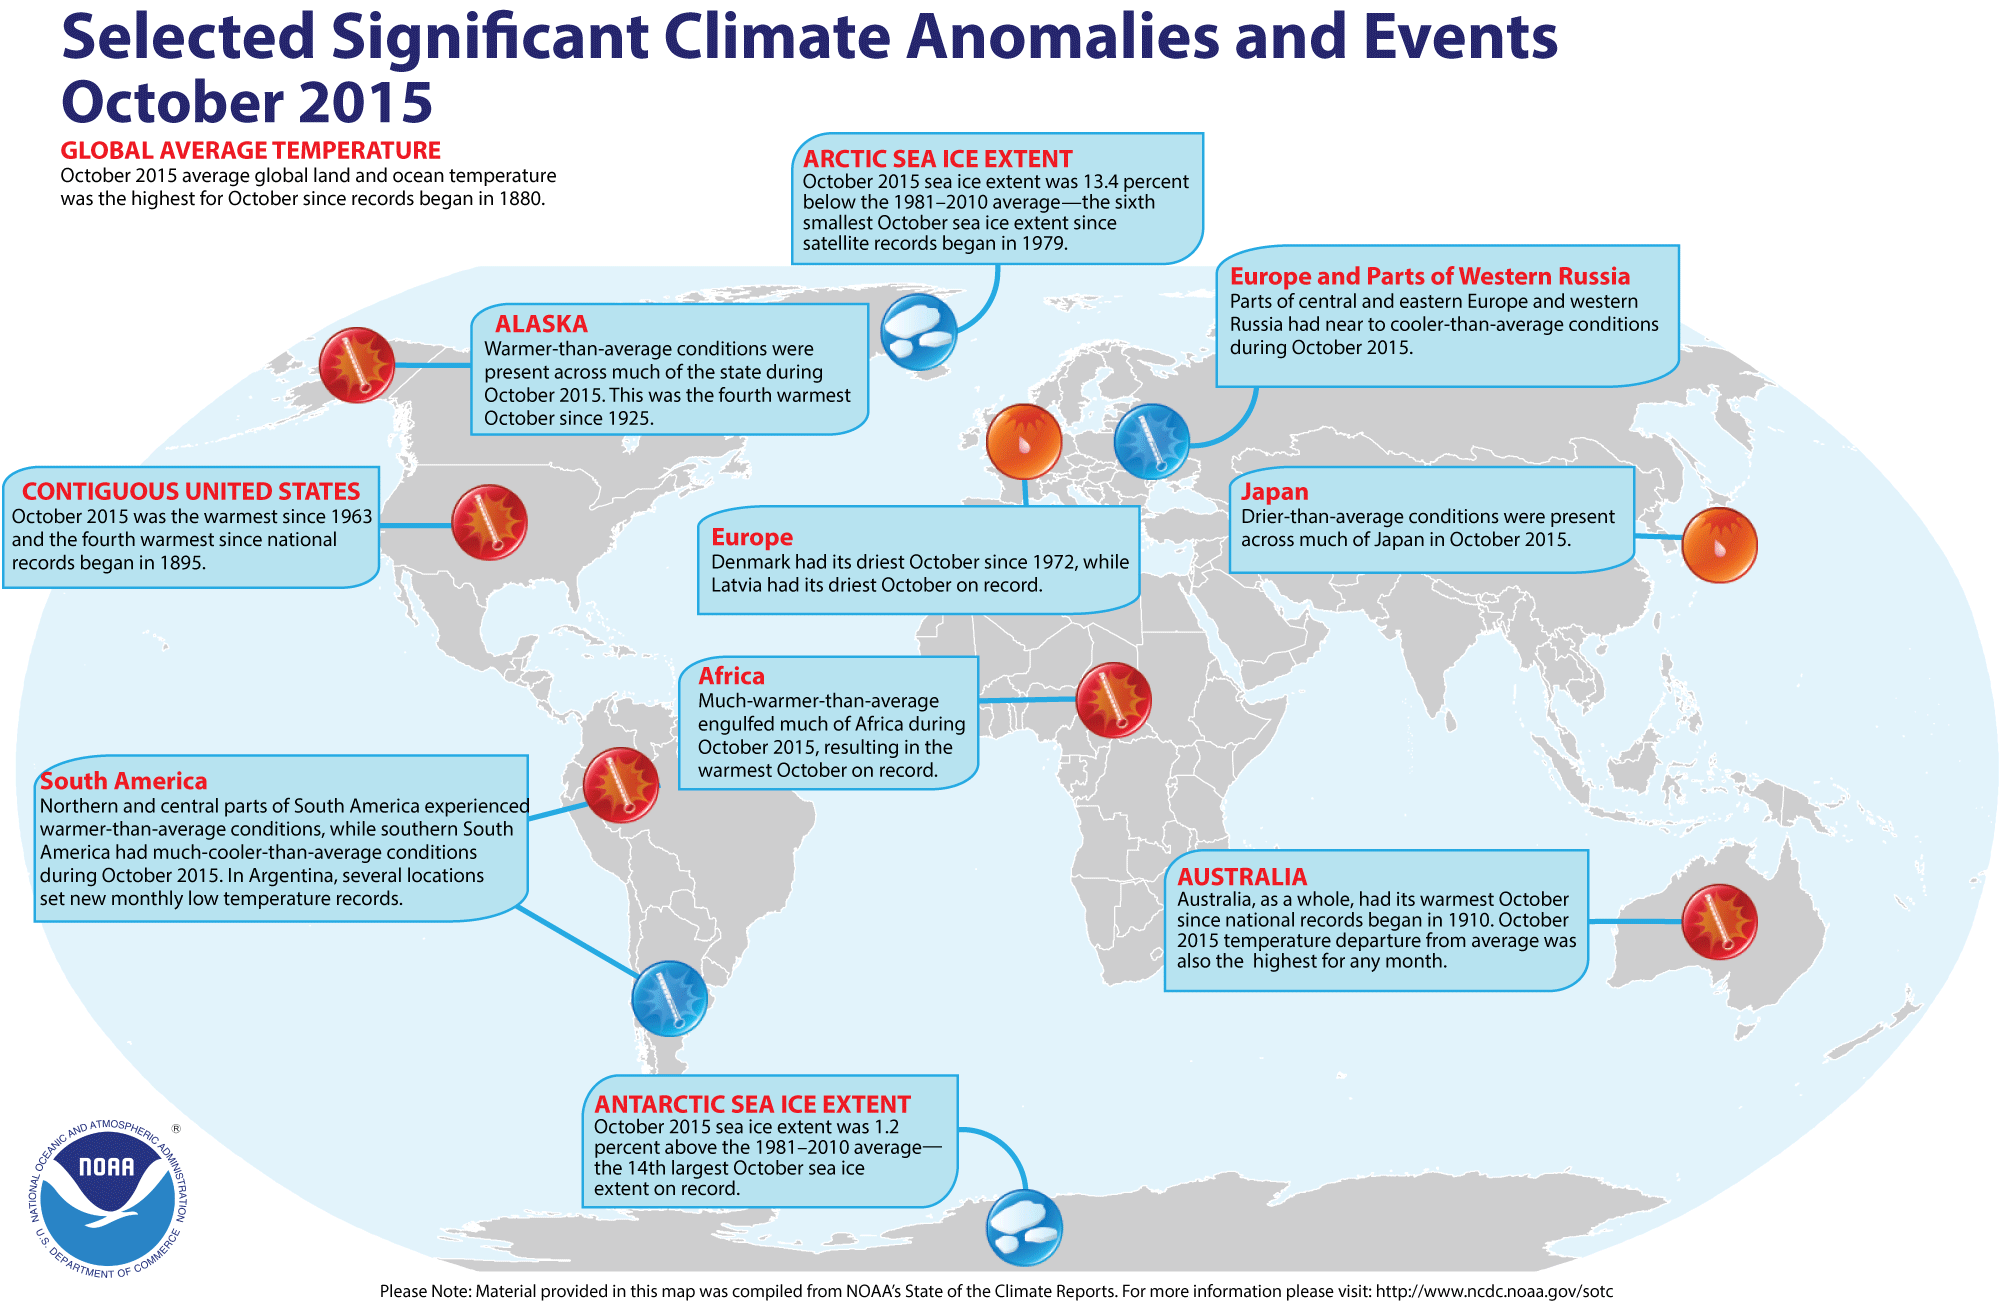 NOAA Significant climate anomalies events October 2015